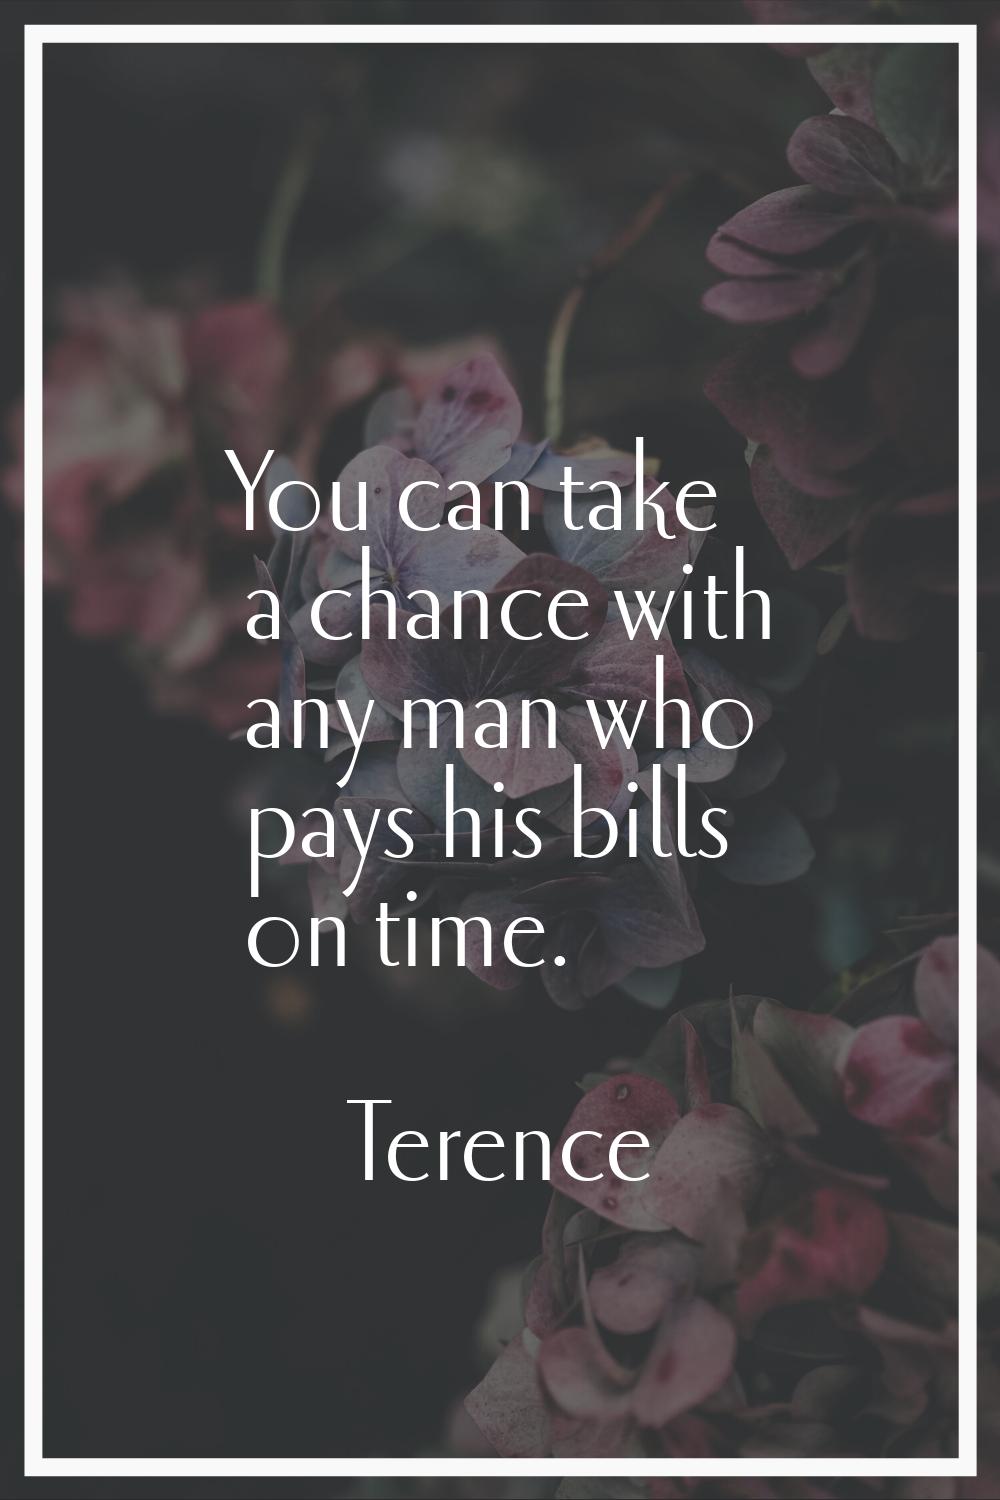 You can take a chance with any man who pays his bills on time.